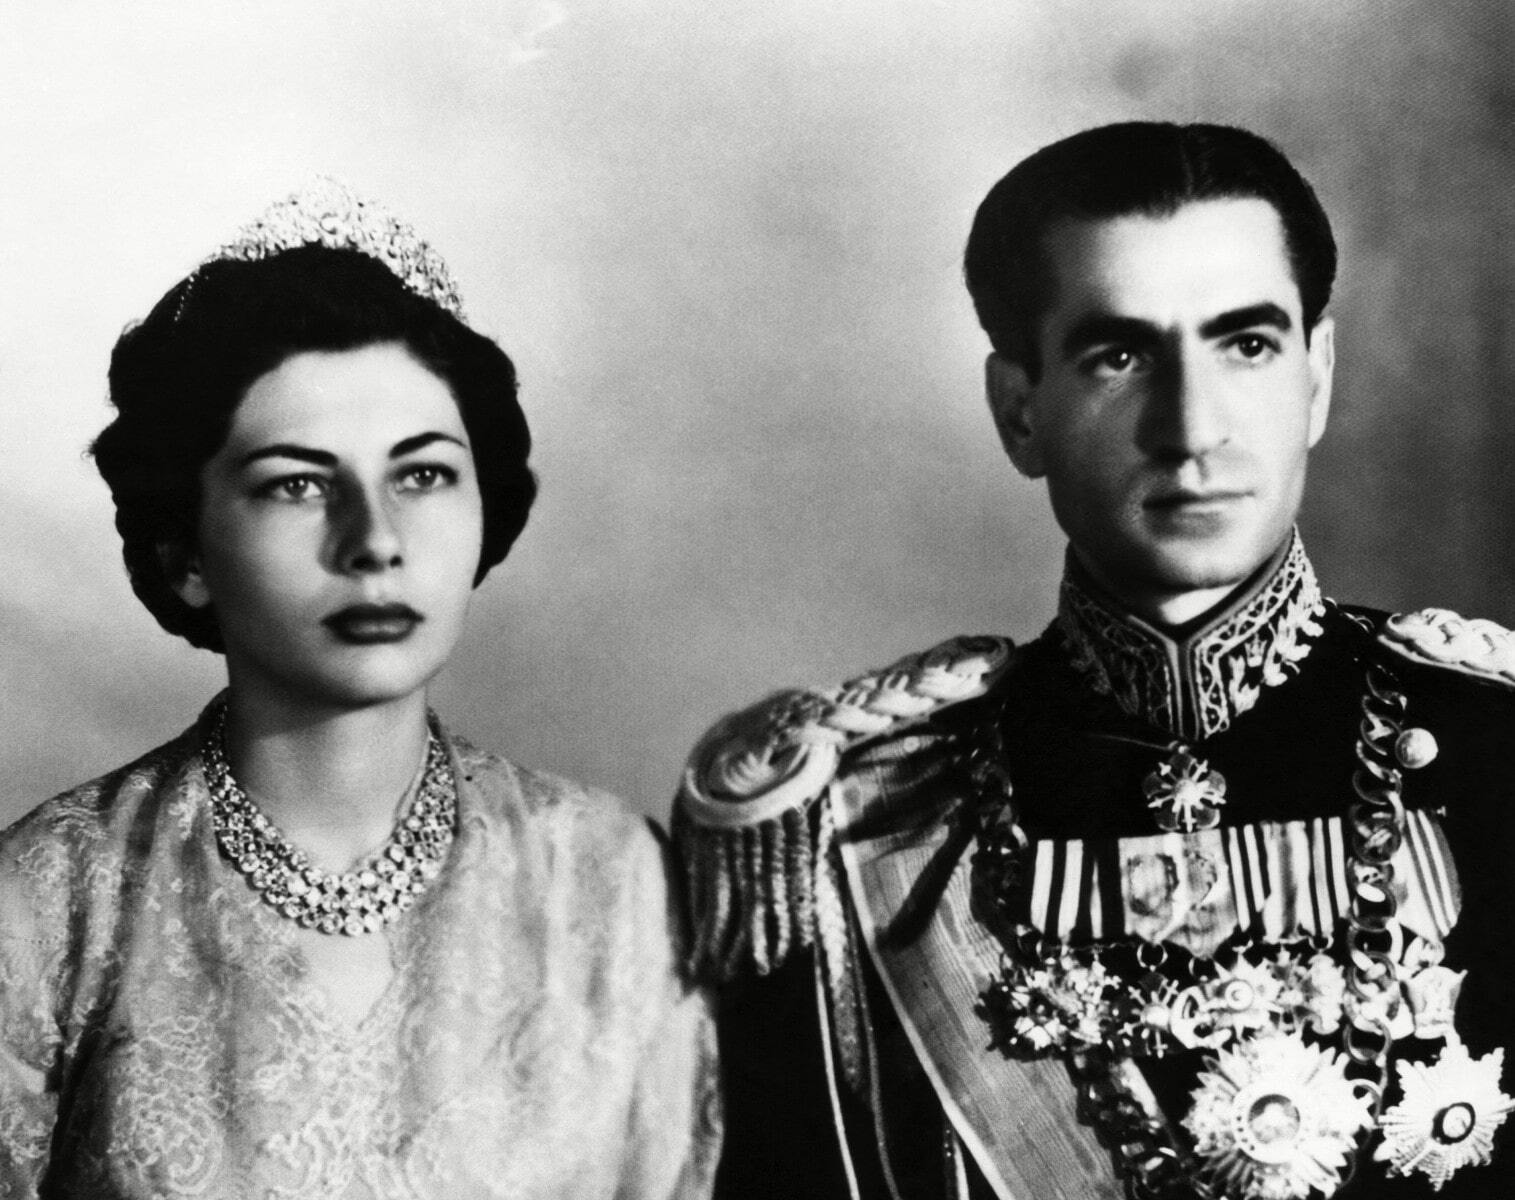 After an unhappy first marriage, Iran's Shah Mohammad Reza Pahlavi fell in love with Soraya Esfandiary, and <a href="https://www.dailymail.co.uk/news/article-4219038/Tragic-life-Princess-Sad-Eyes-revealed.html" rel="noreferrer noopener">they wed in 1951</a>. All was well until he learned that his new queen could not have children. Iran nevertheless needed a male heir, so the marriage, now a state affair, was dissolved in 1958. Afterward known as the “princess with the sad eyes,” Soraya spent the rest of her life in exile.